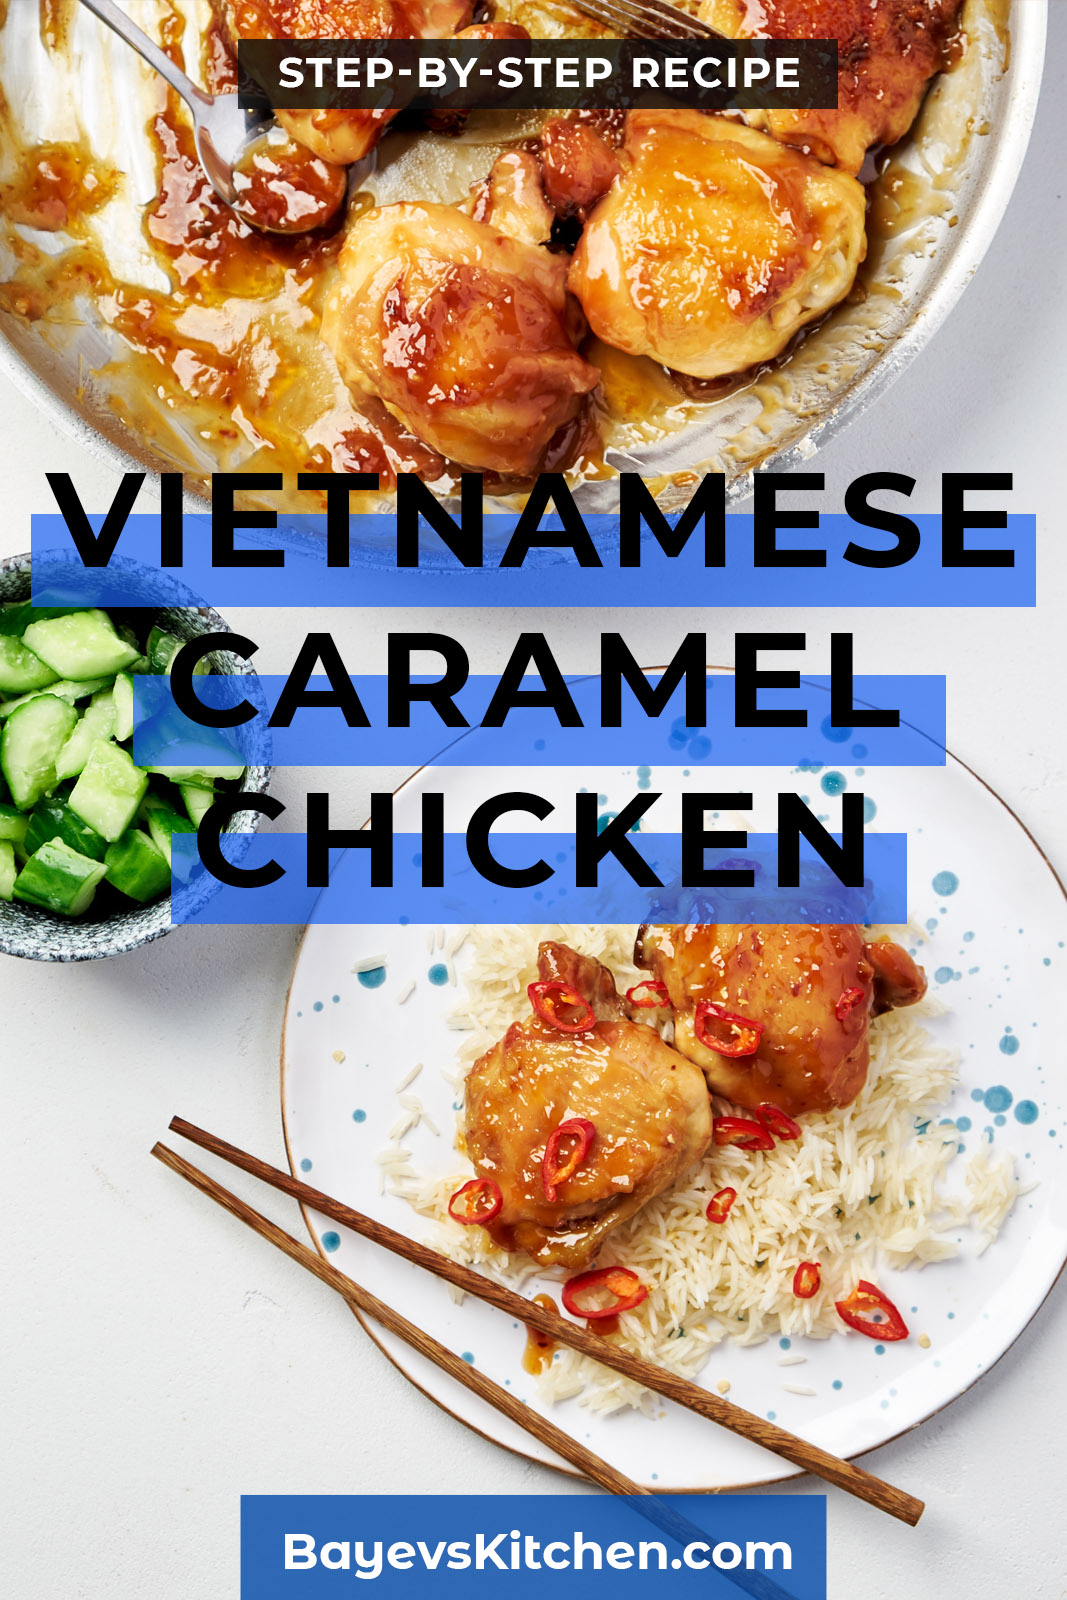 Vietnamese Caramel Chicken. A caramel sauce gives the chicken a sweetness and the same smoothness as caramel. There’s a little chili to tickle the taste buds slightly and fish sauce perfectly emphasizes the taste of meat, makes it richer, and helps to tie all flavors together. In the end, the sweet and salty components work perfectly together. Reminding us once again that most brilliant things are simple. Via @bayevskitchen